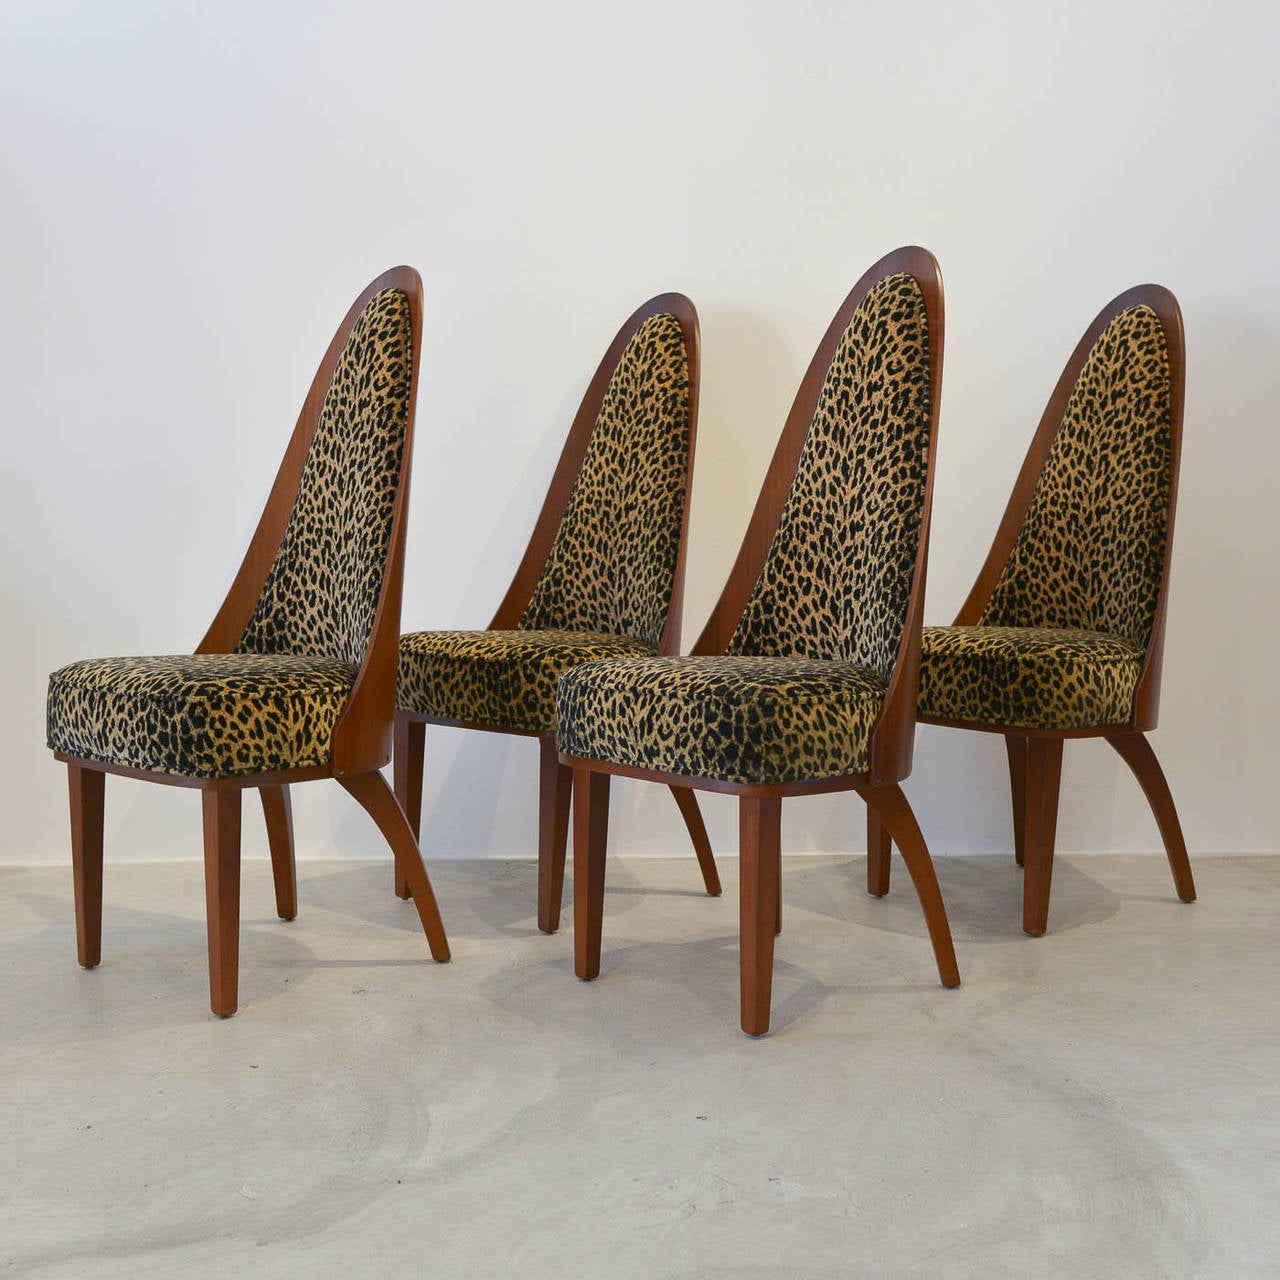 A beautiful and rare set of four atomic dining chairs by Chet Beardsley. Professionally restored wood is in perfect showroom condition. Original leopard velvet fabric is original to the chairs, and the fabric and foam are excellent.

Highly